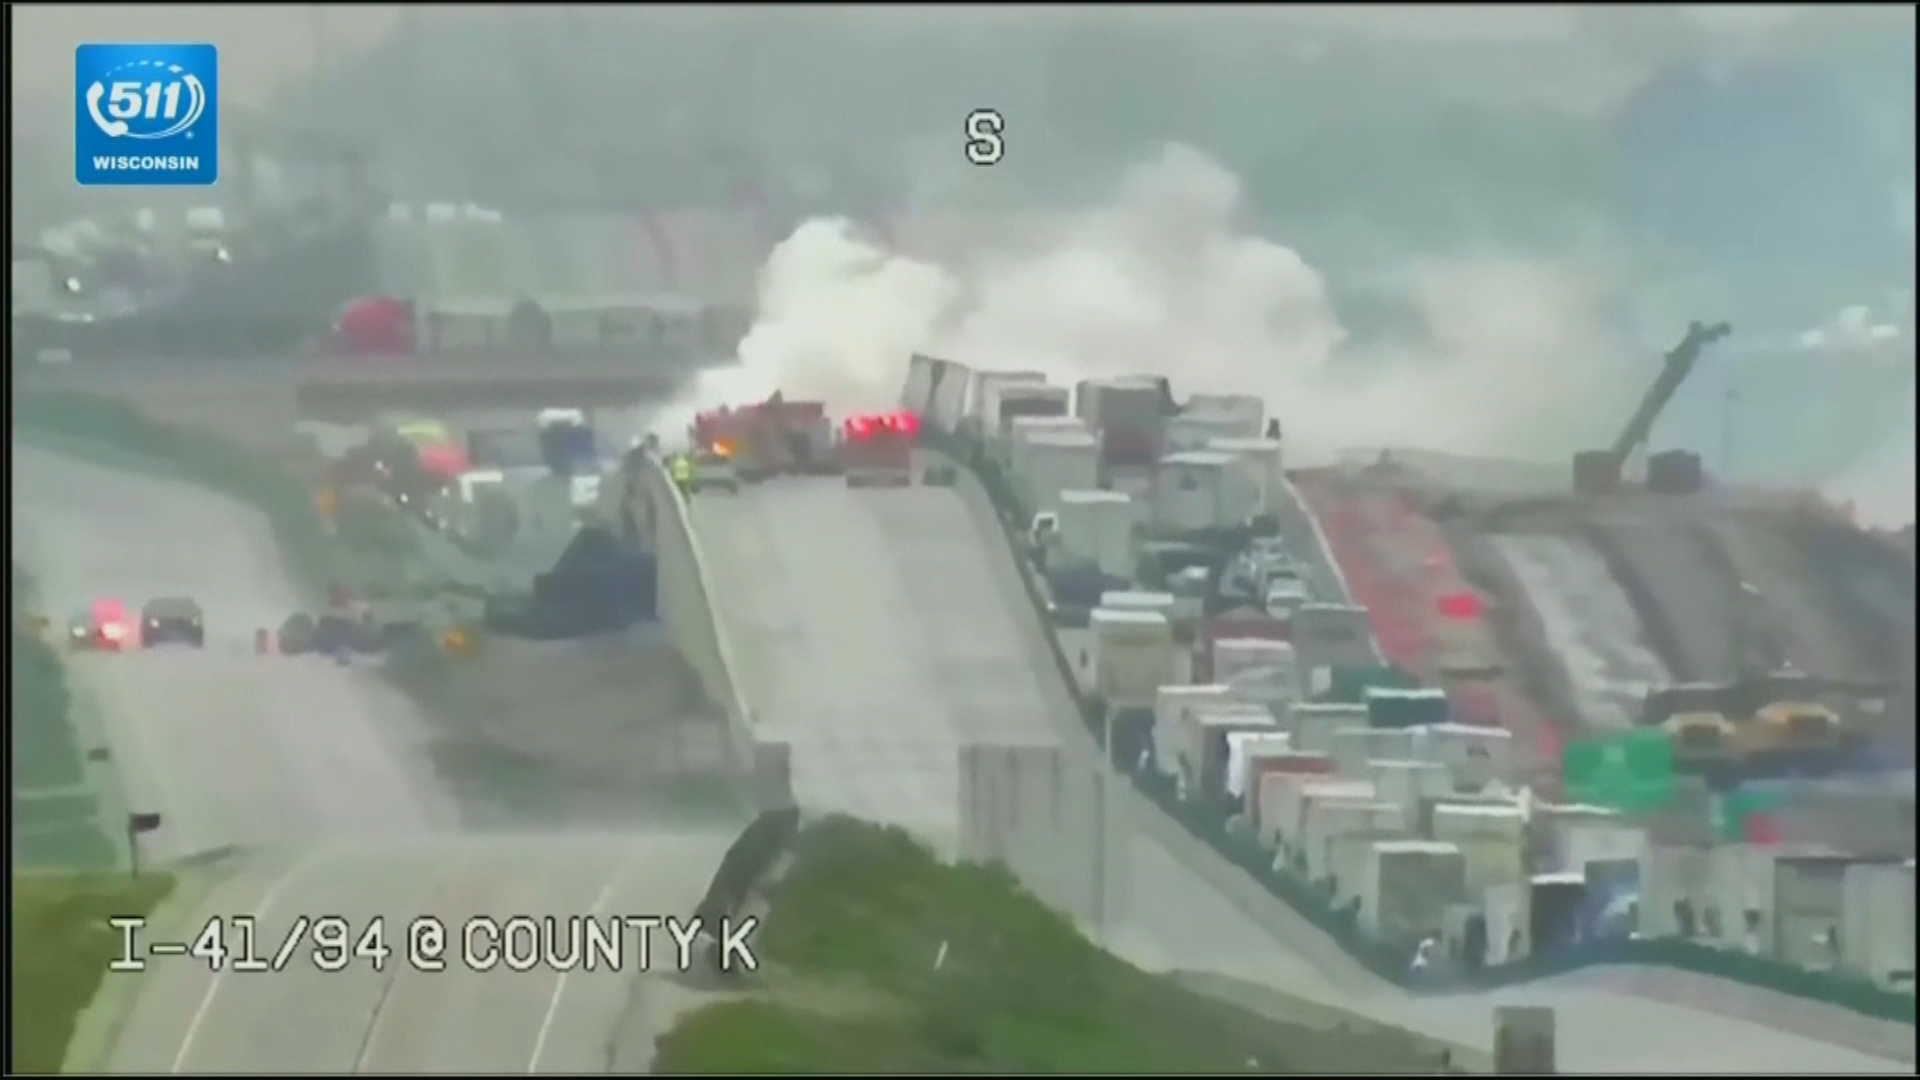 At Least 1 Dead After Semi Explodes, Closing I-41/94 in Wis.